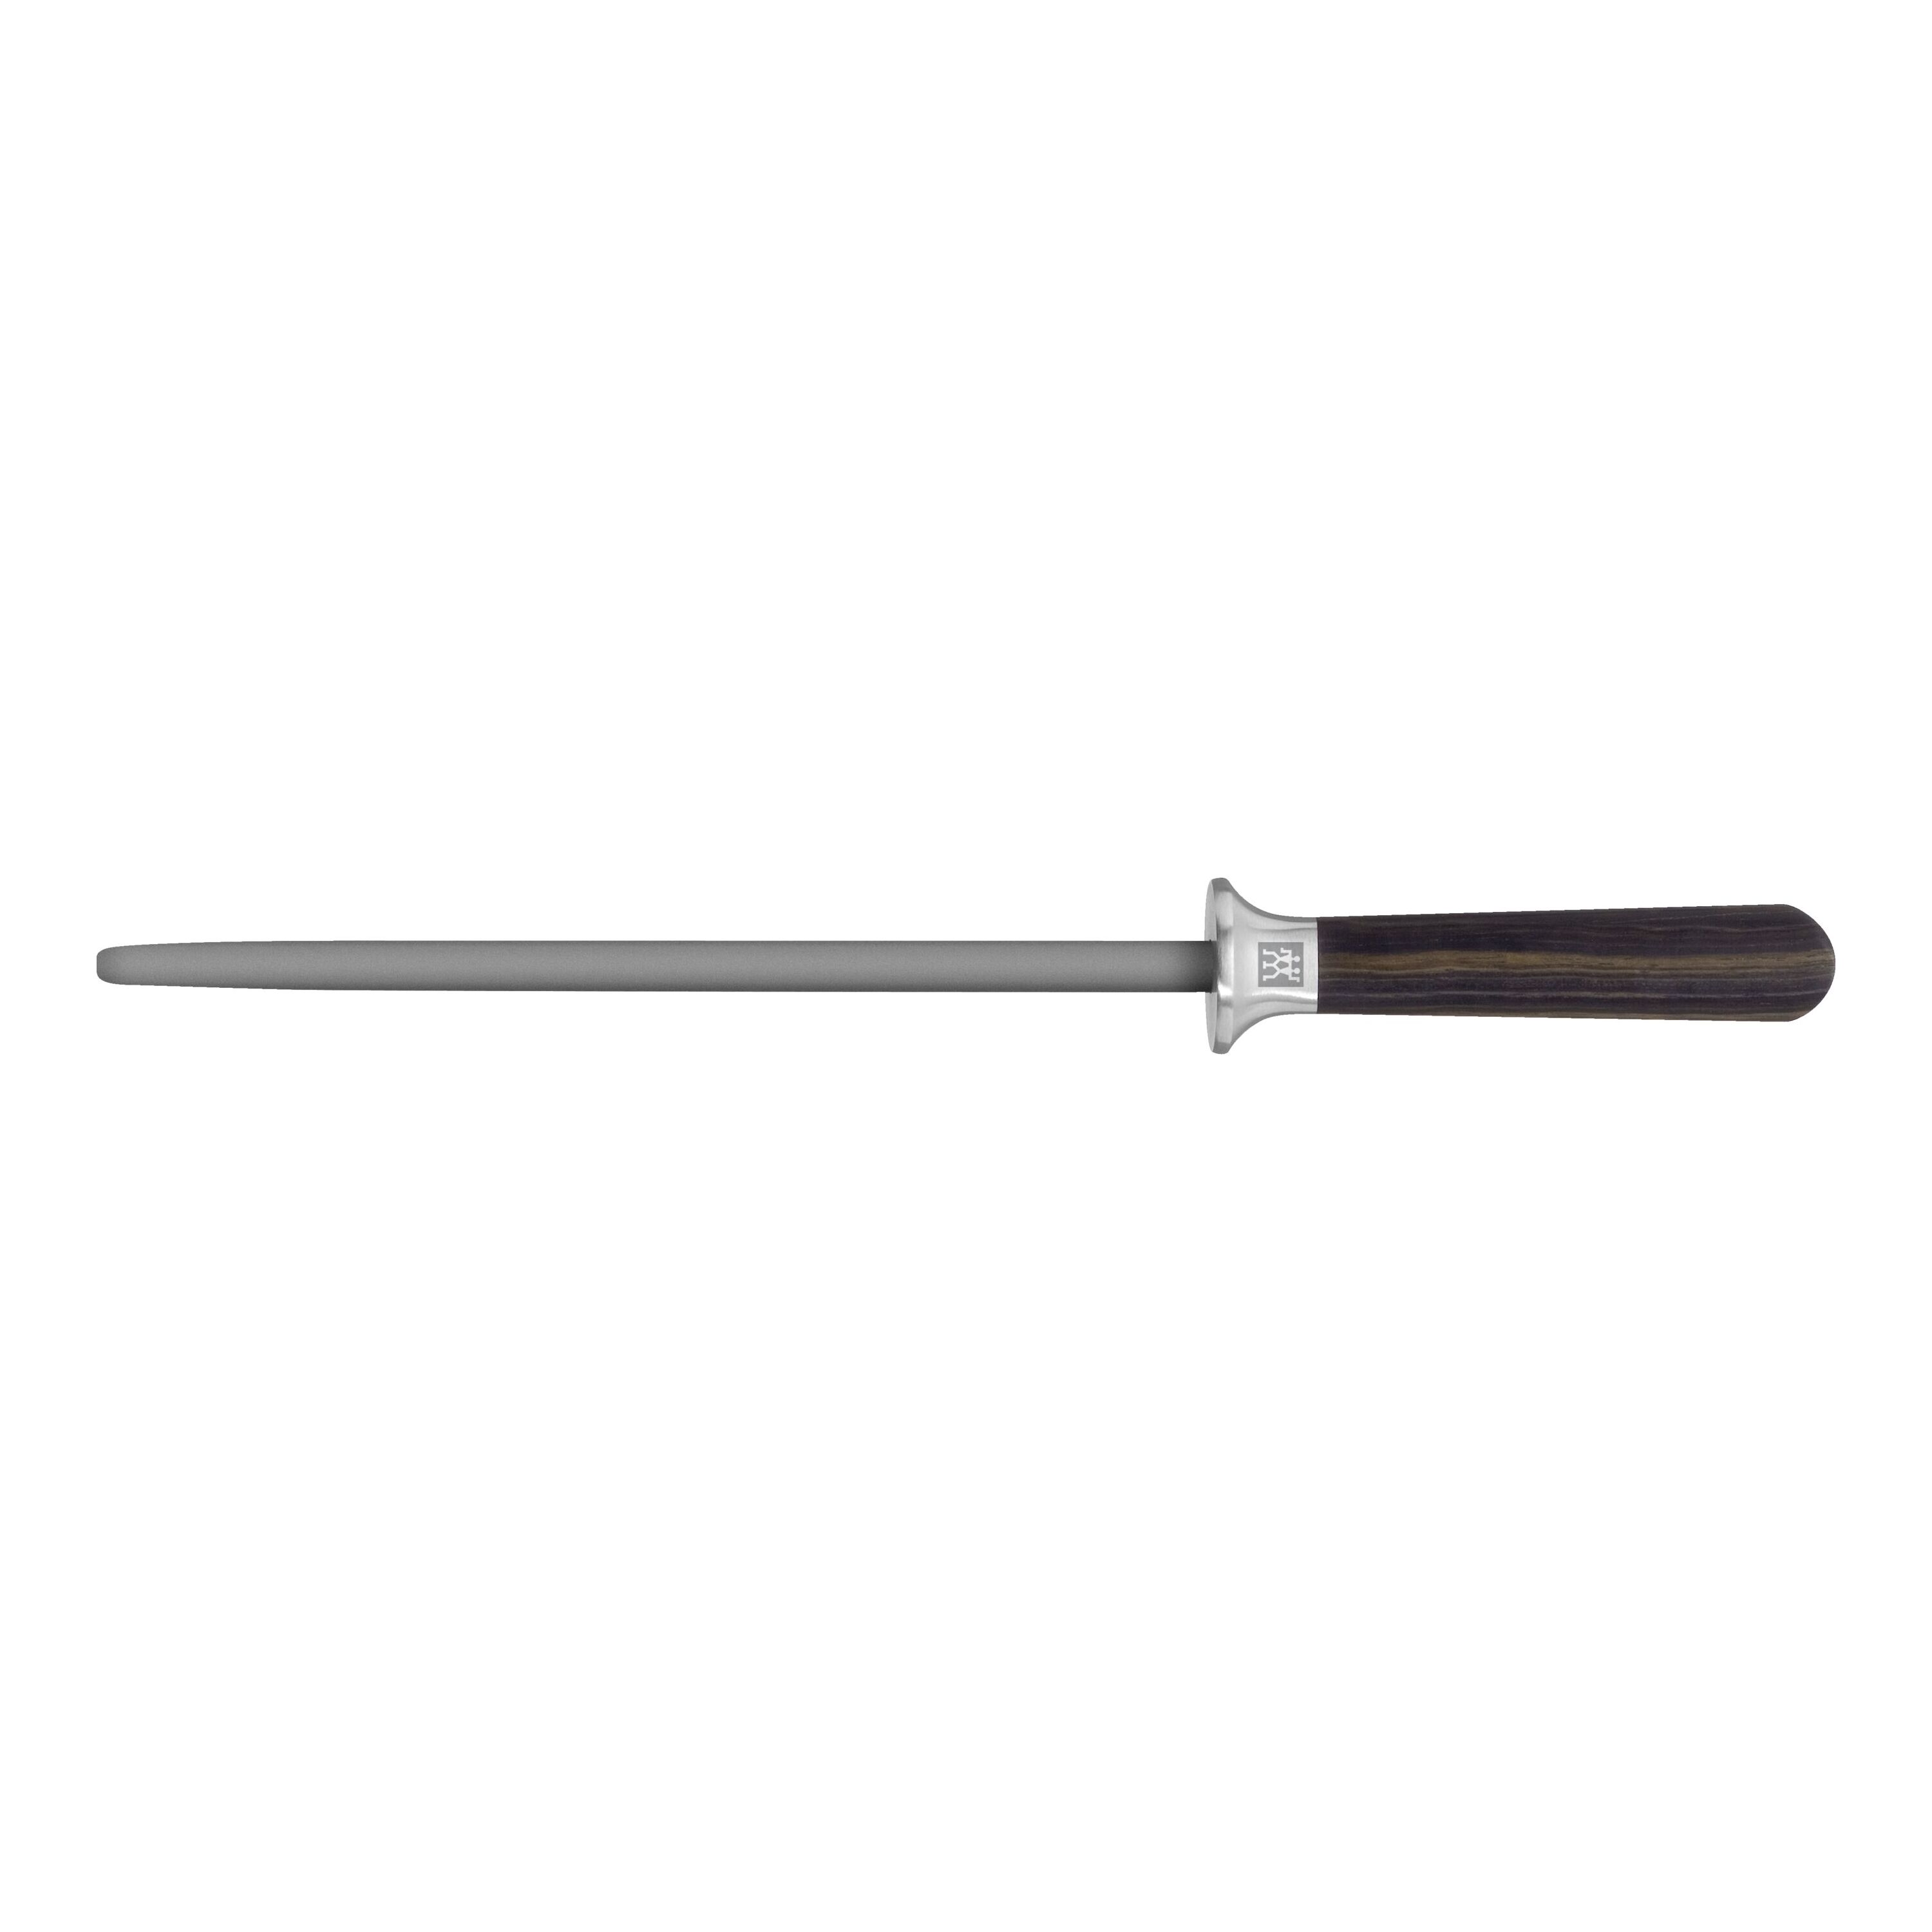 ZWILLING TWIN 1731 9-inch, Sharpening Steel